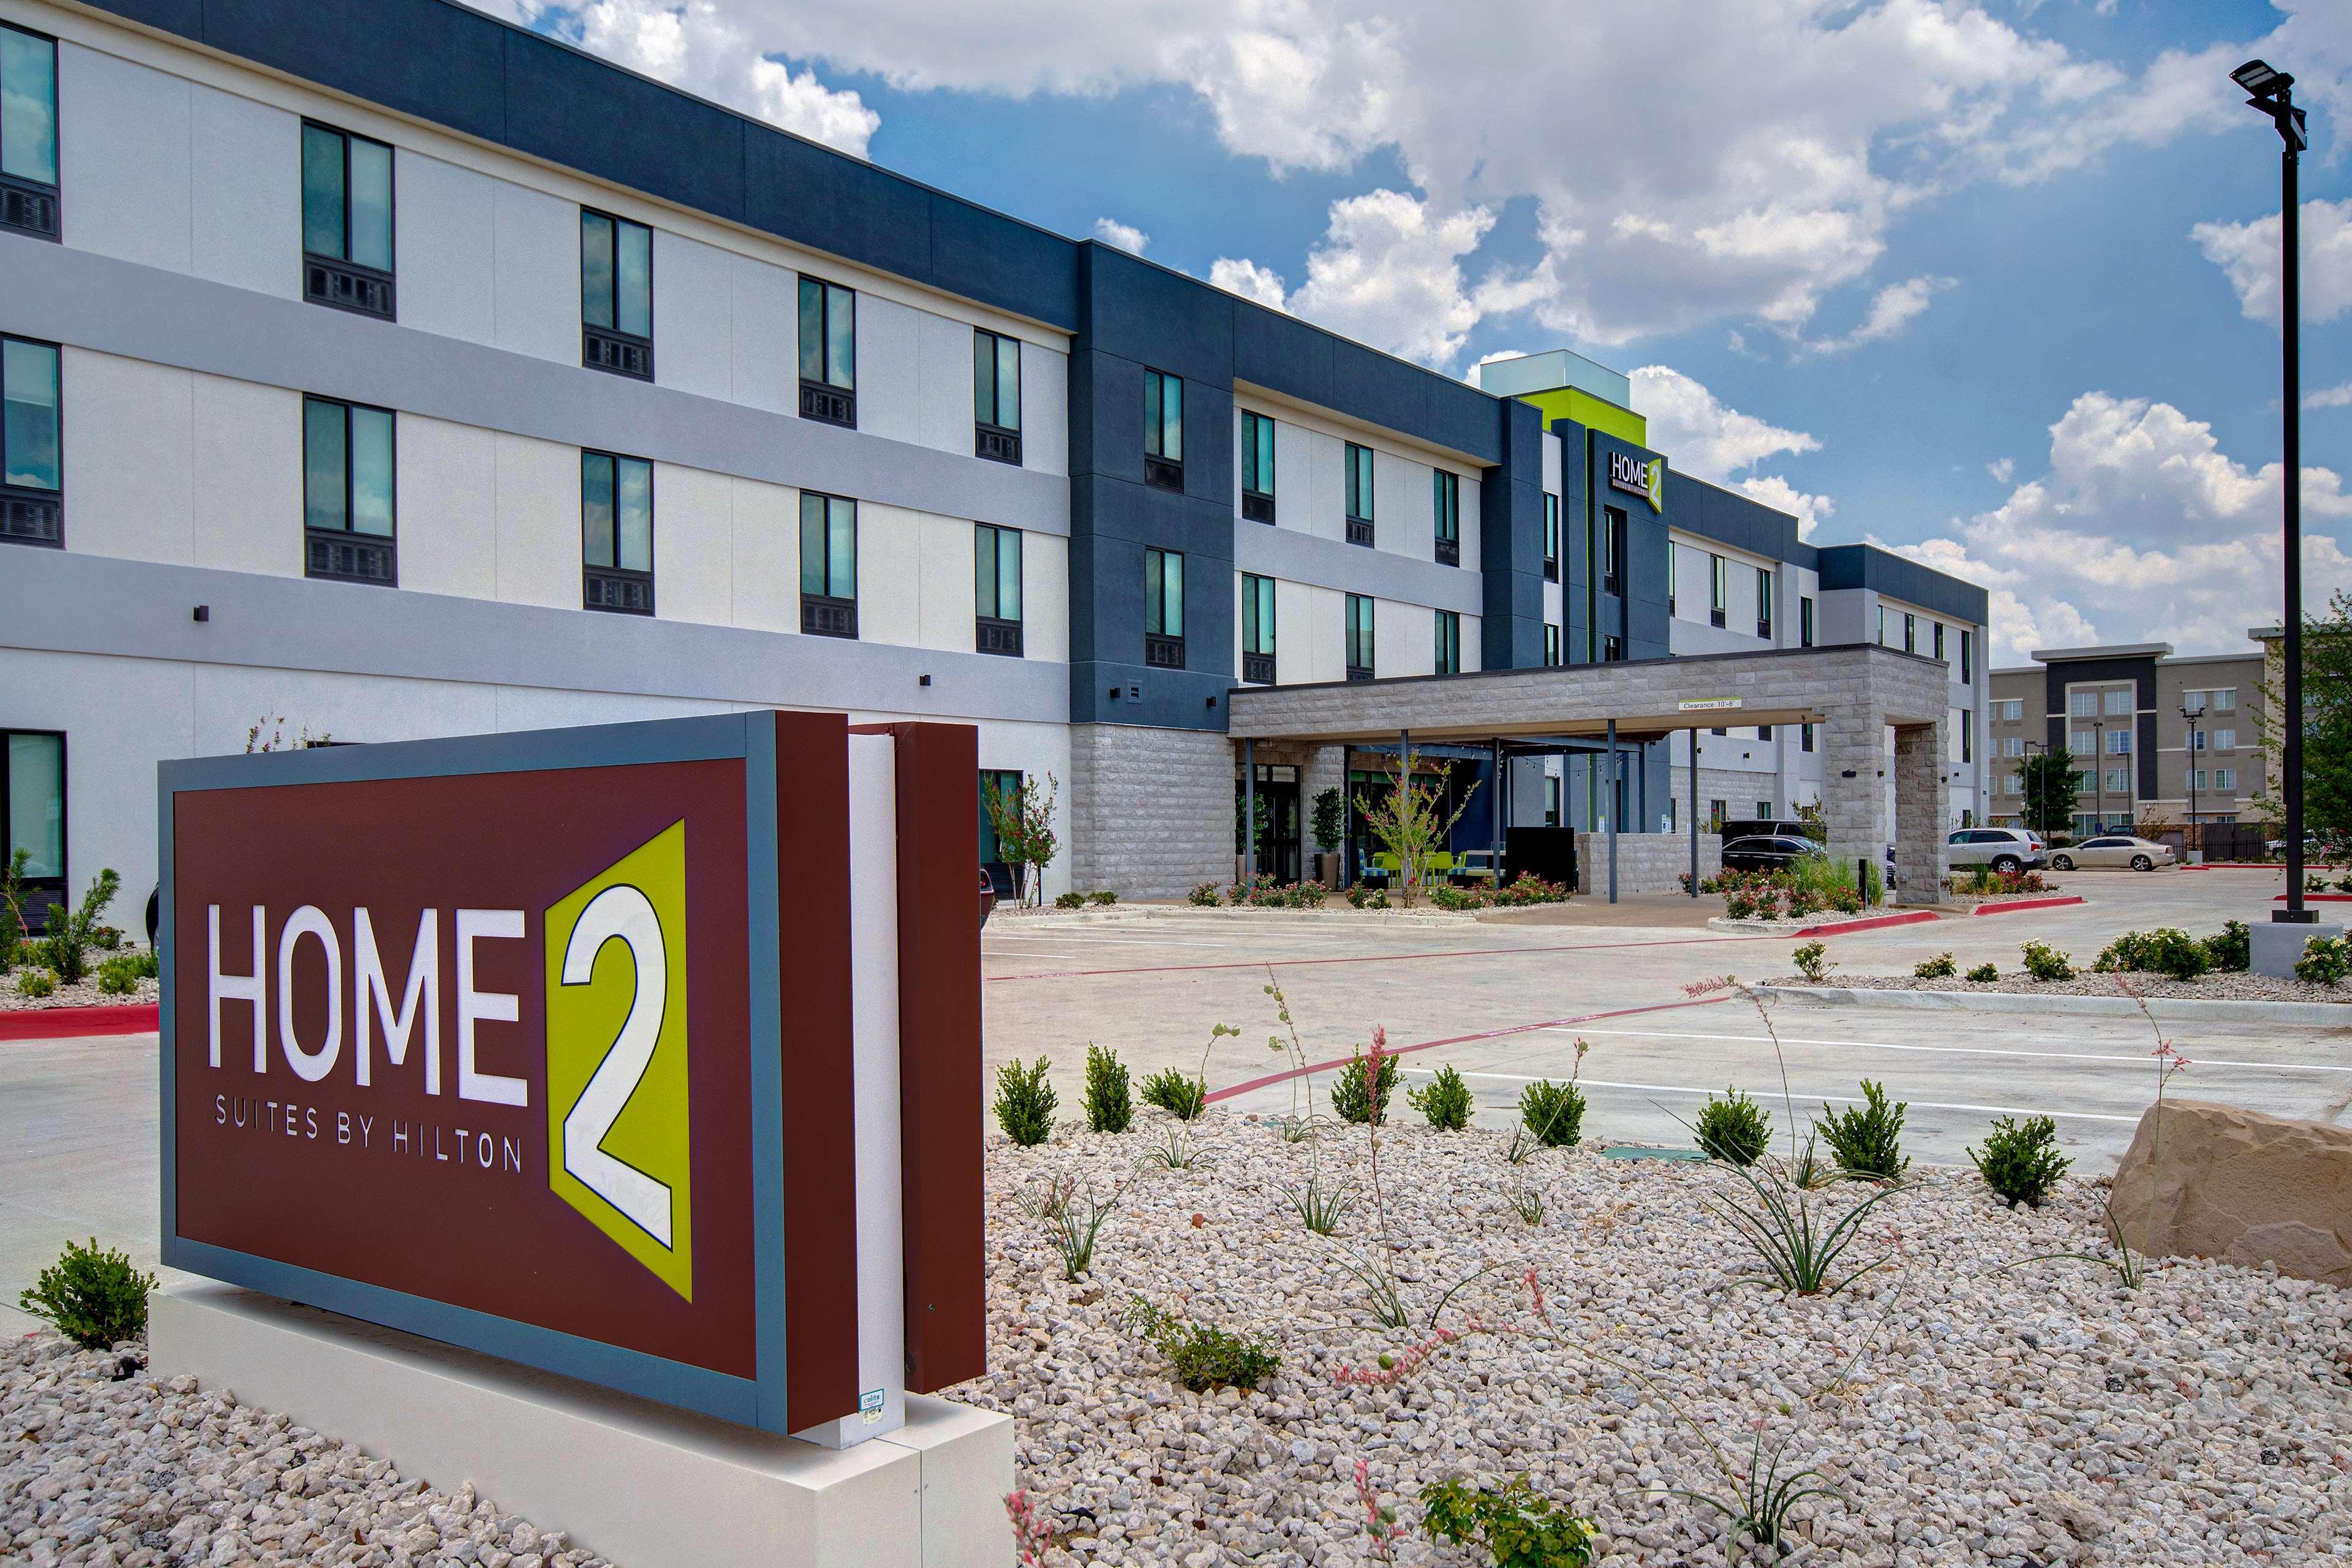 Home2 Suites by Hilton Burleson image